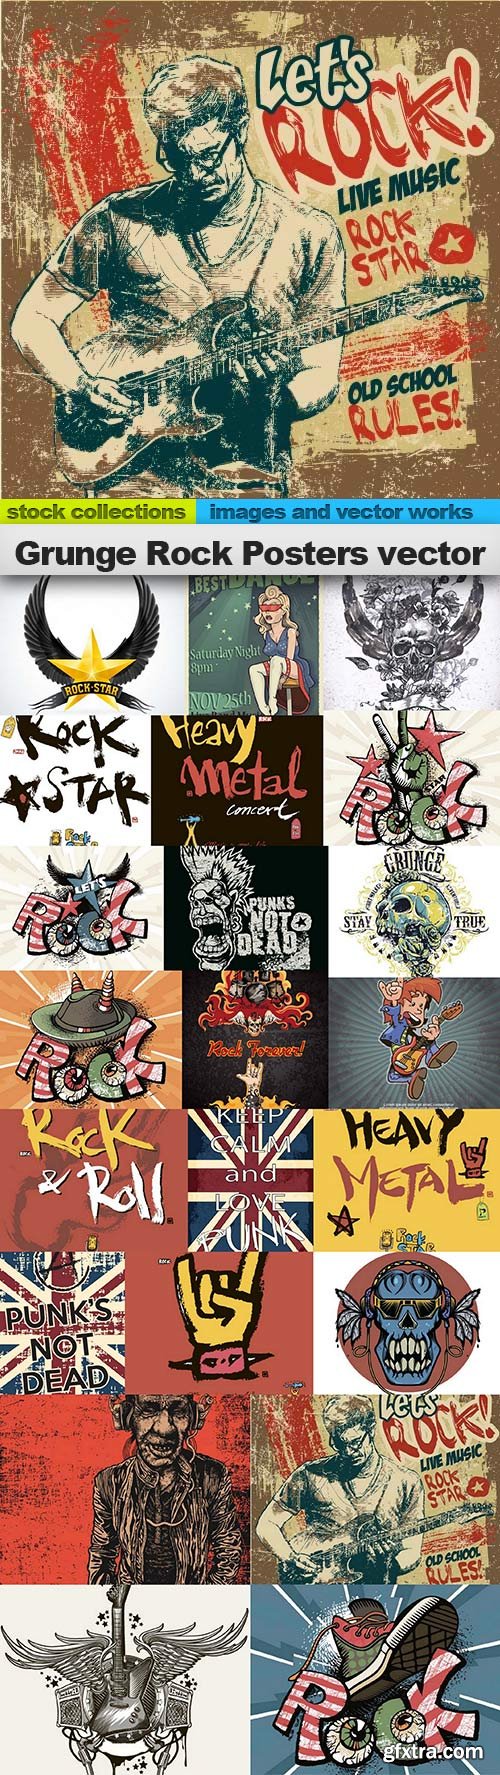 Grunge Rock Posters vector, 22 x EPS